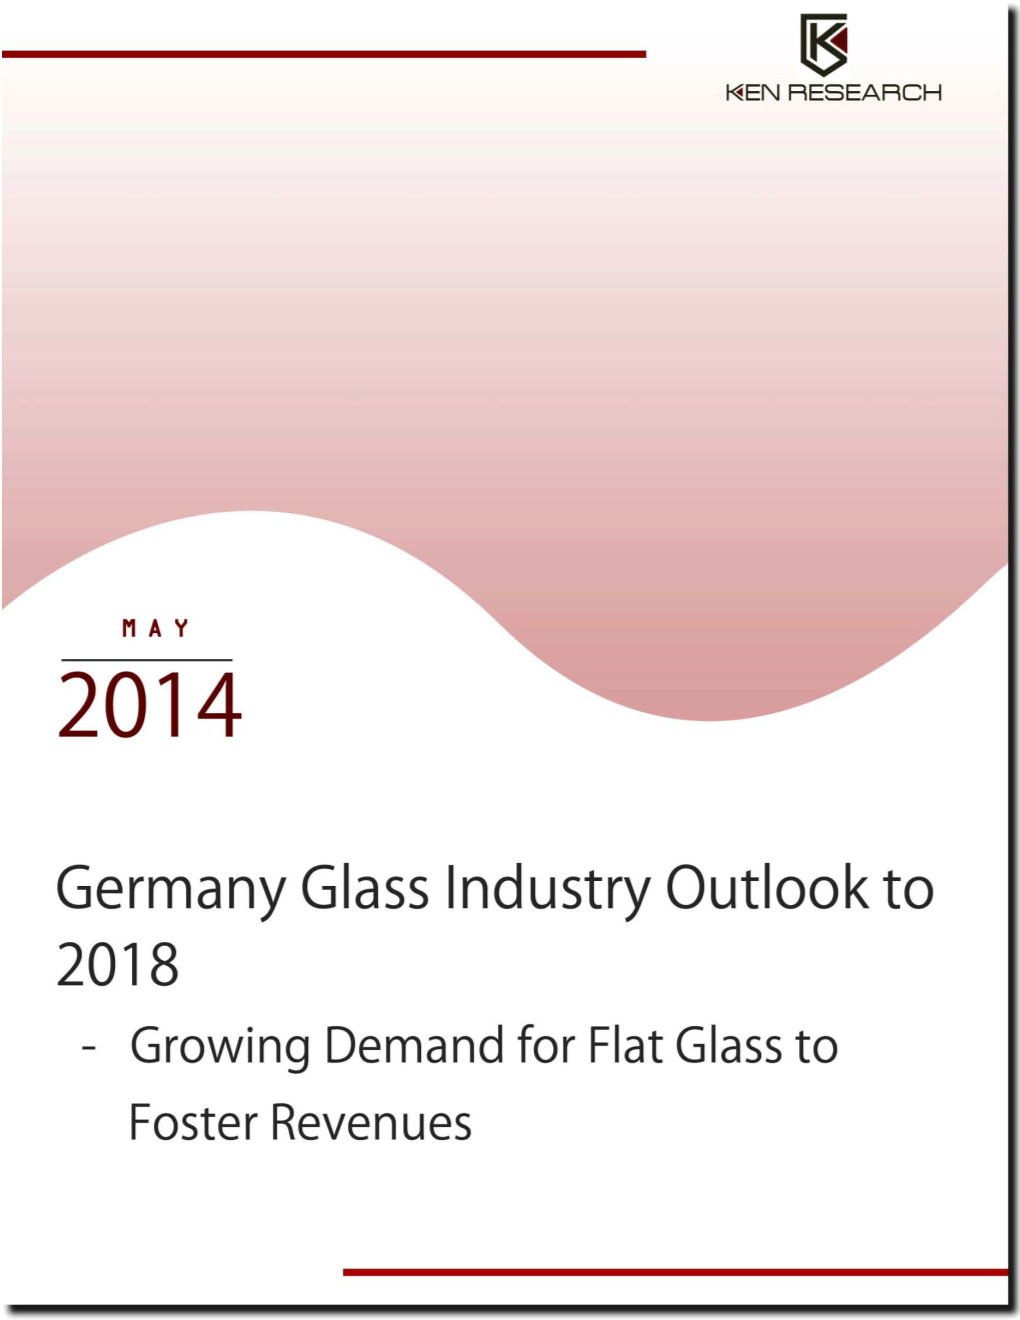 Germany Glass Industry Outlook to 2018